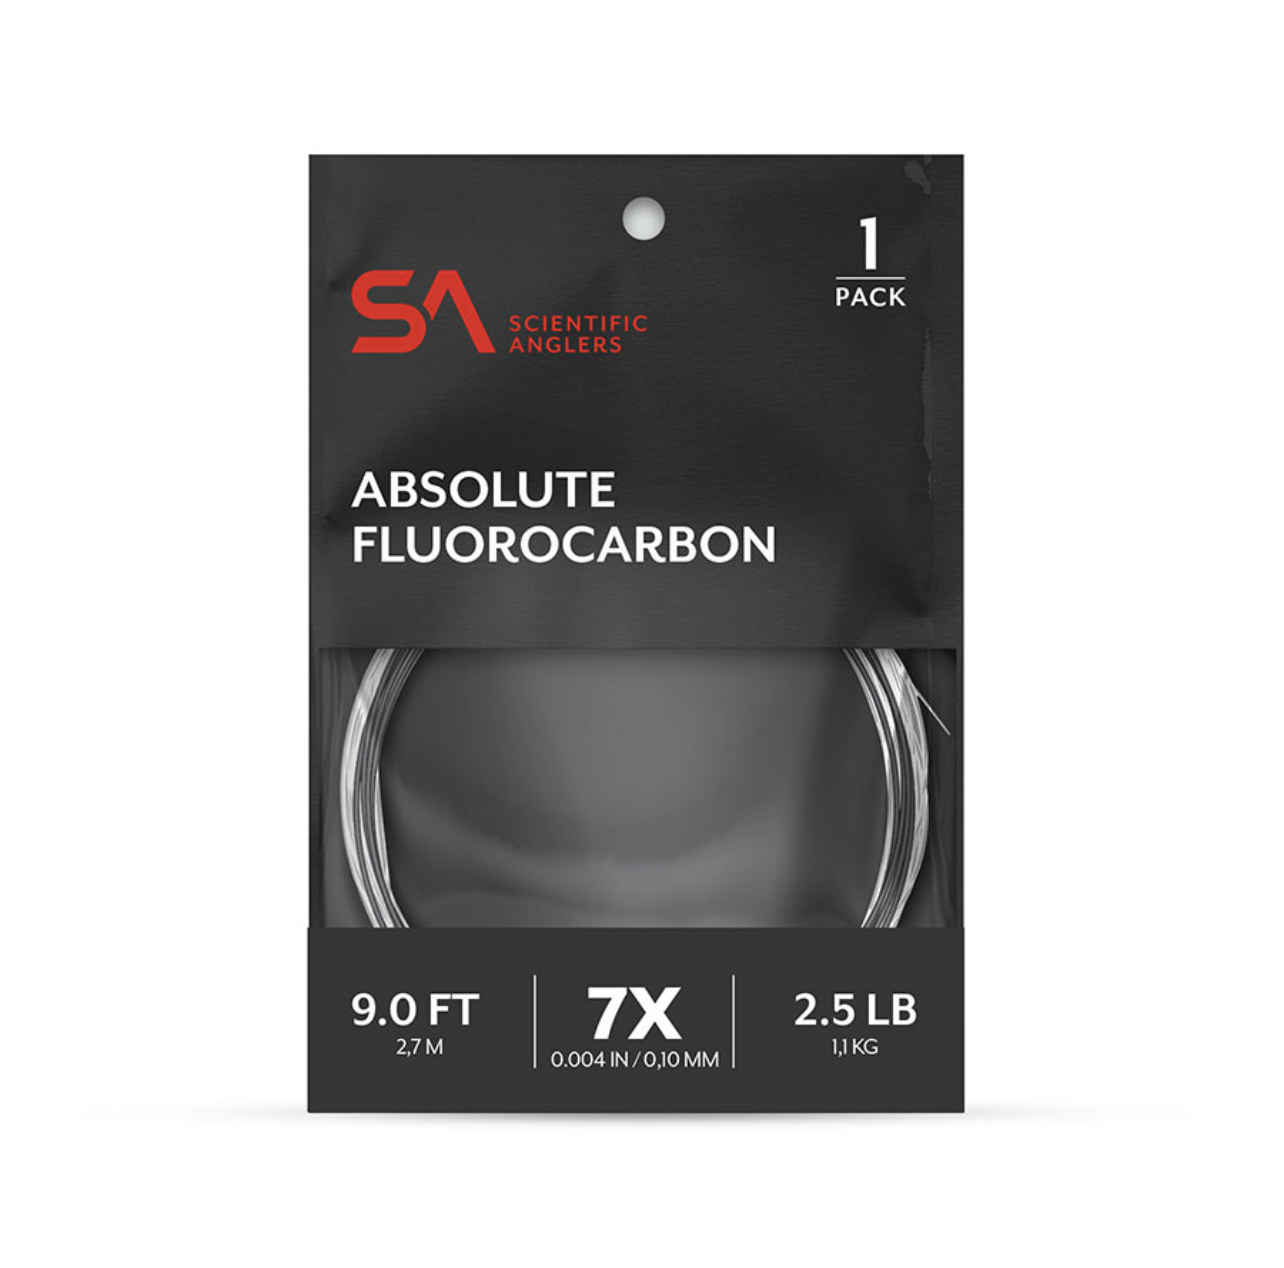 Scientific Anglers Absolute Fluorocarbon Leader - 12ft - 6lb